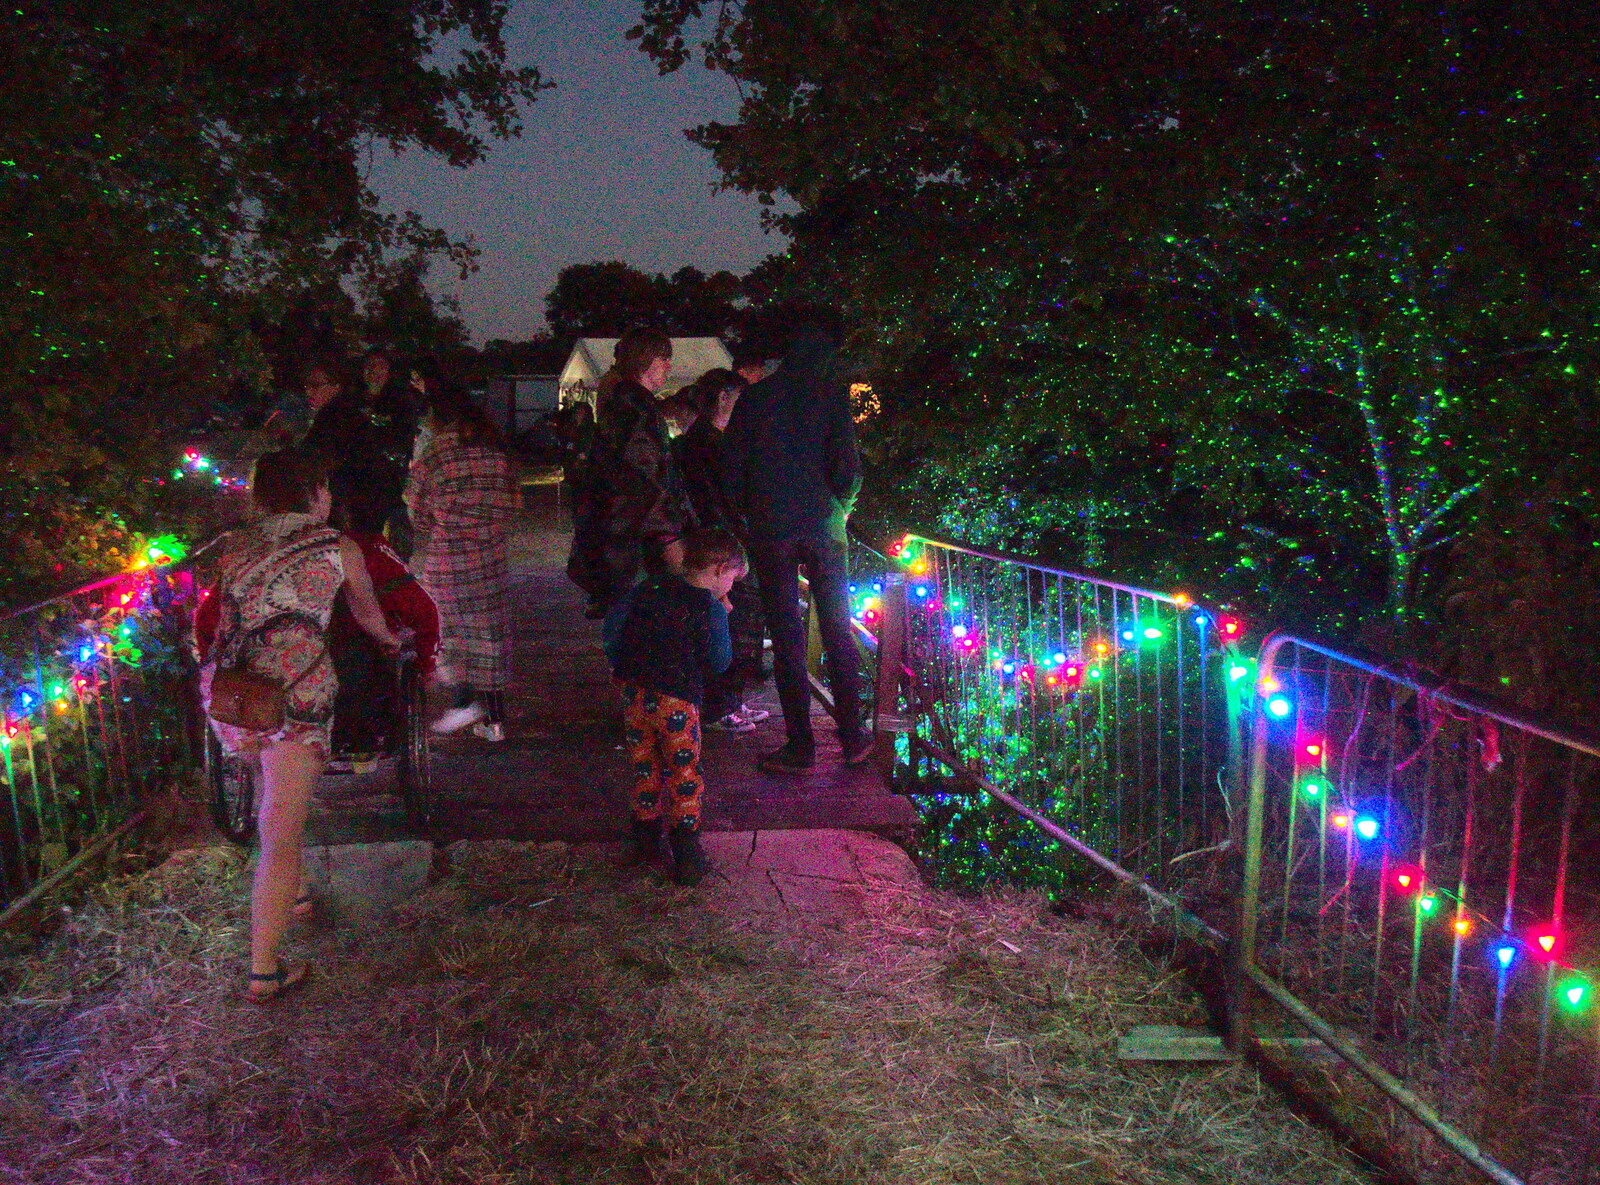 There's a cool laser installation on the bridge from WoW Festival, Burston, Norfolk - 29th June - 1st July 2018